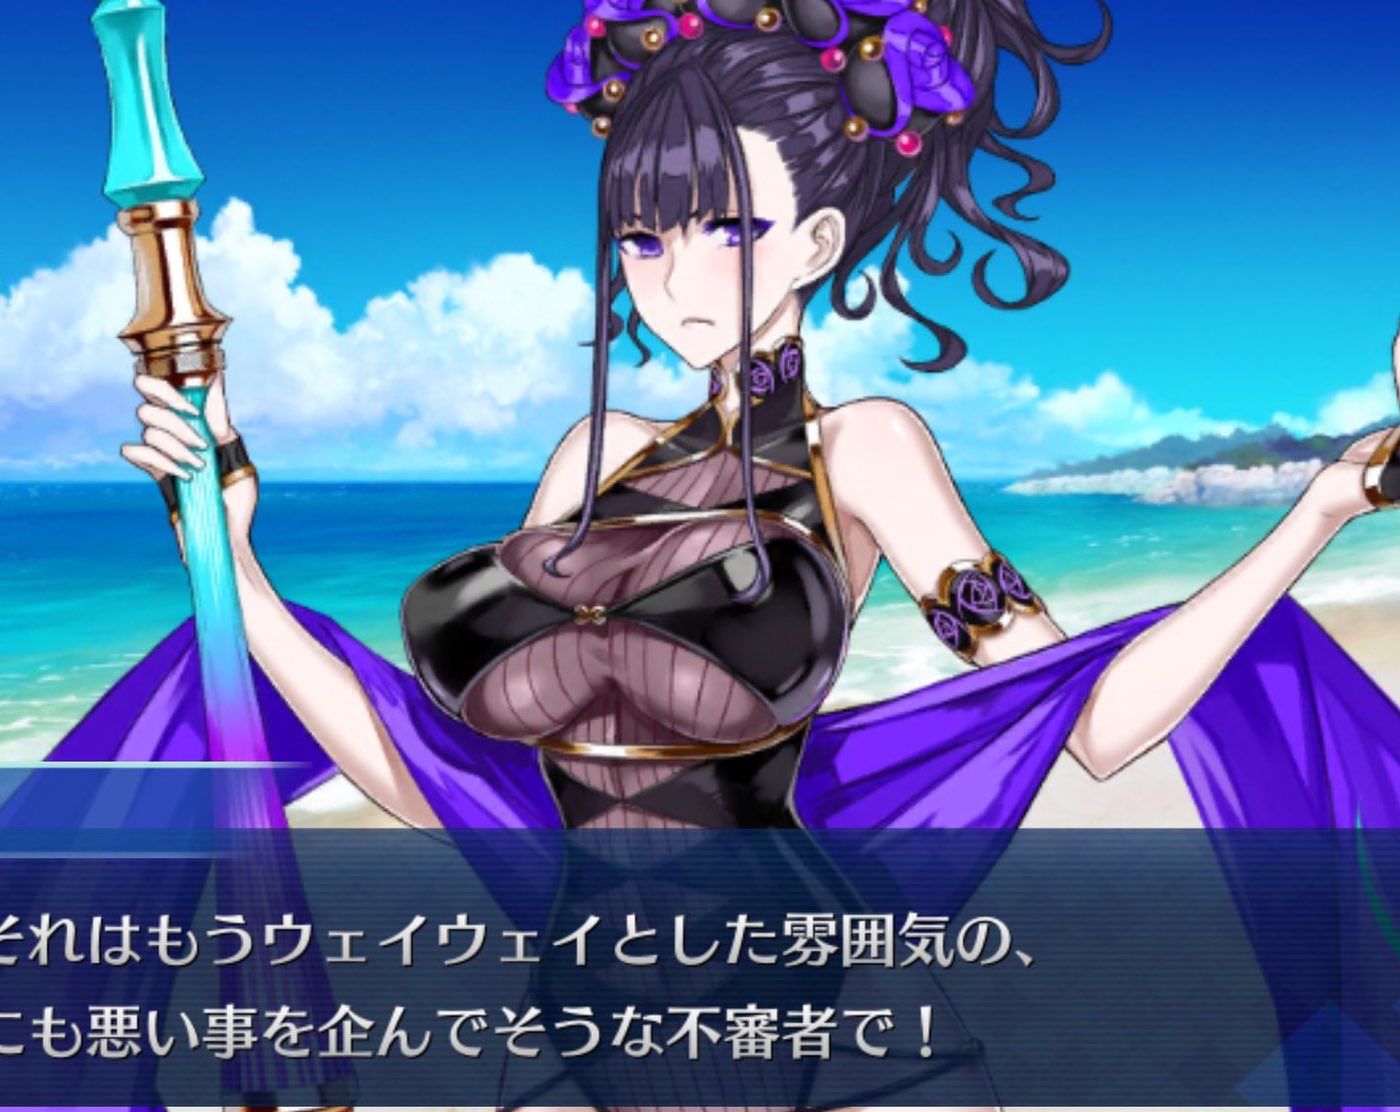 【Sad News】 FGO, the character of the swimsuit event is too sexual, and without age limit is slapped as abnormal 2